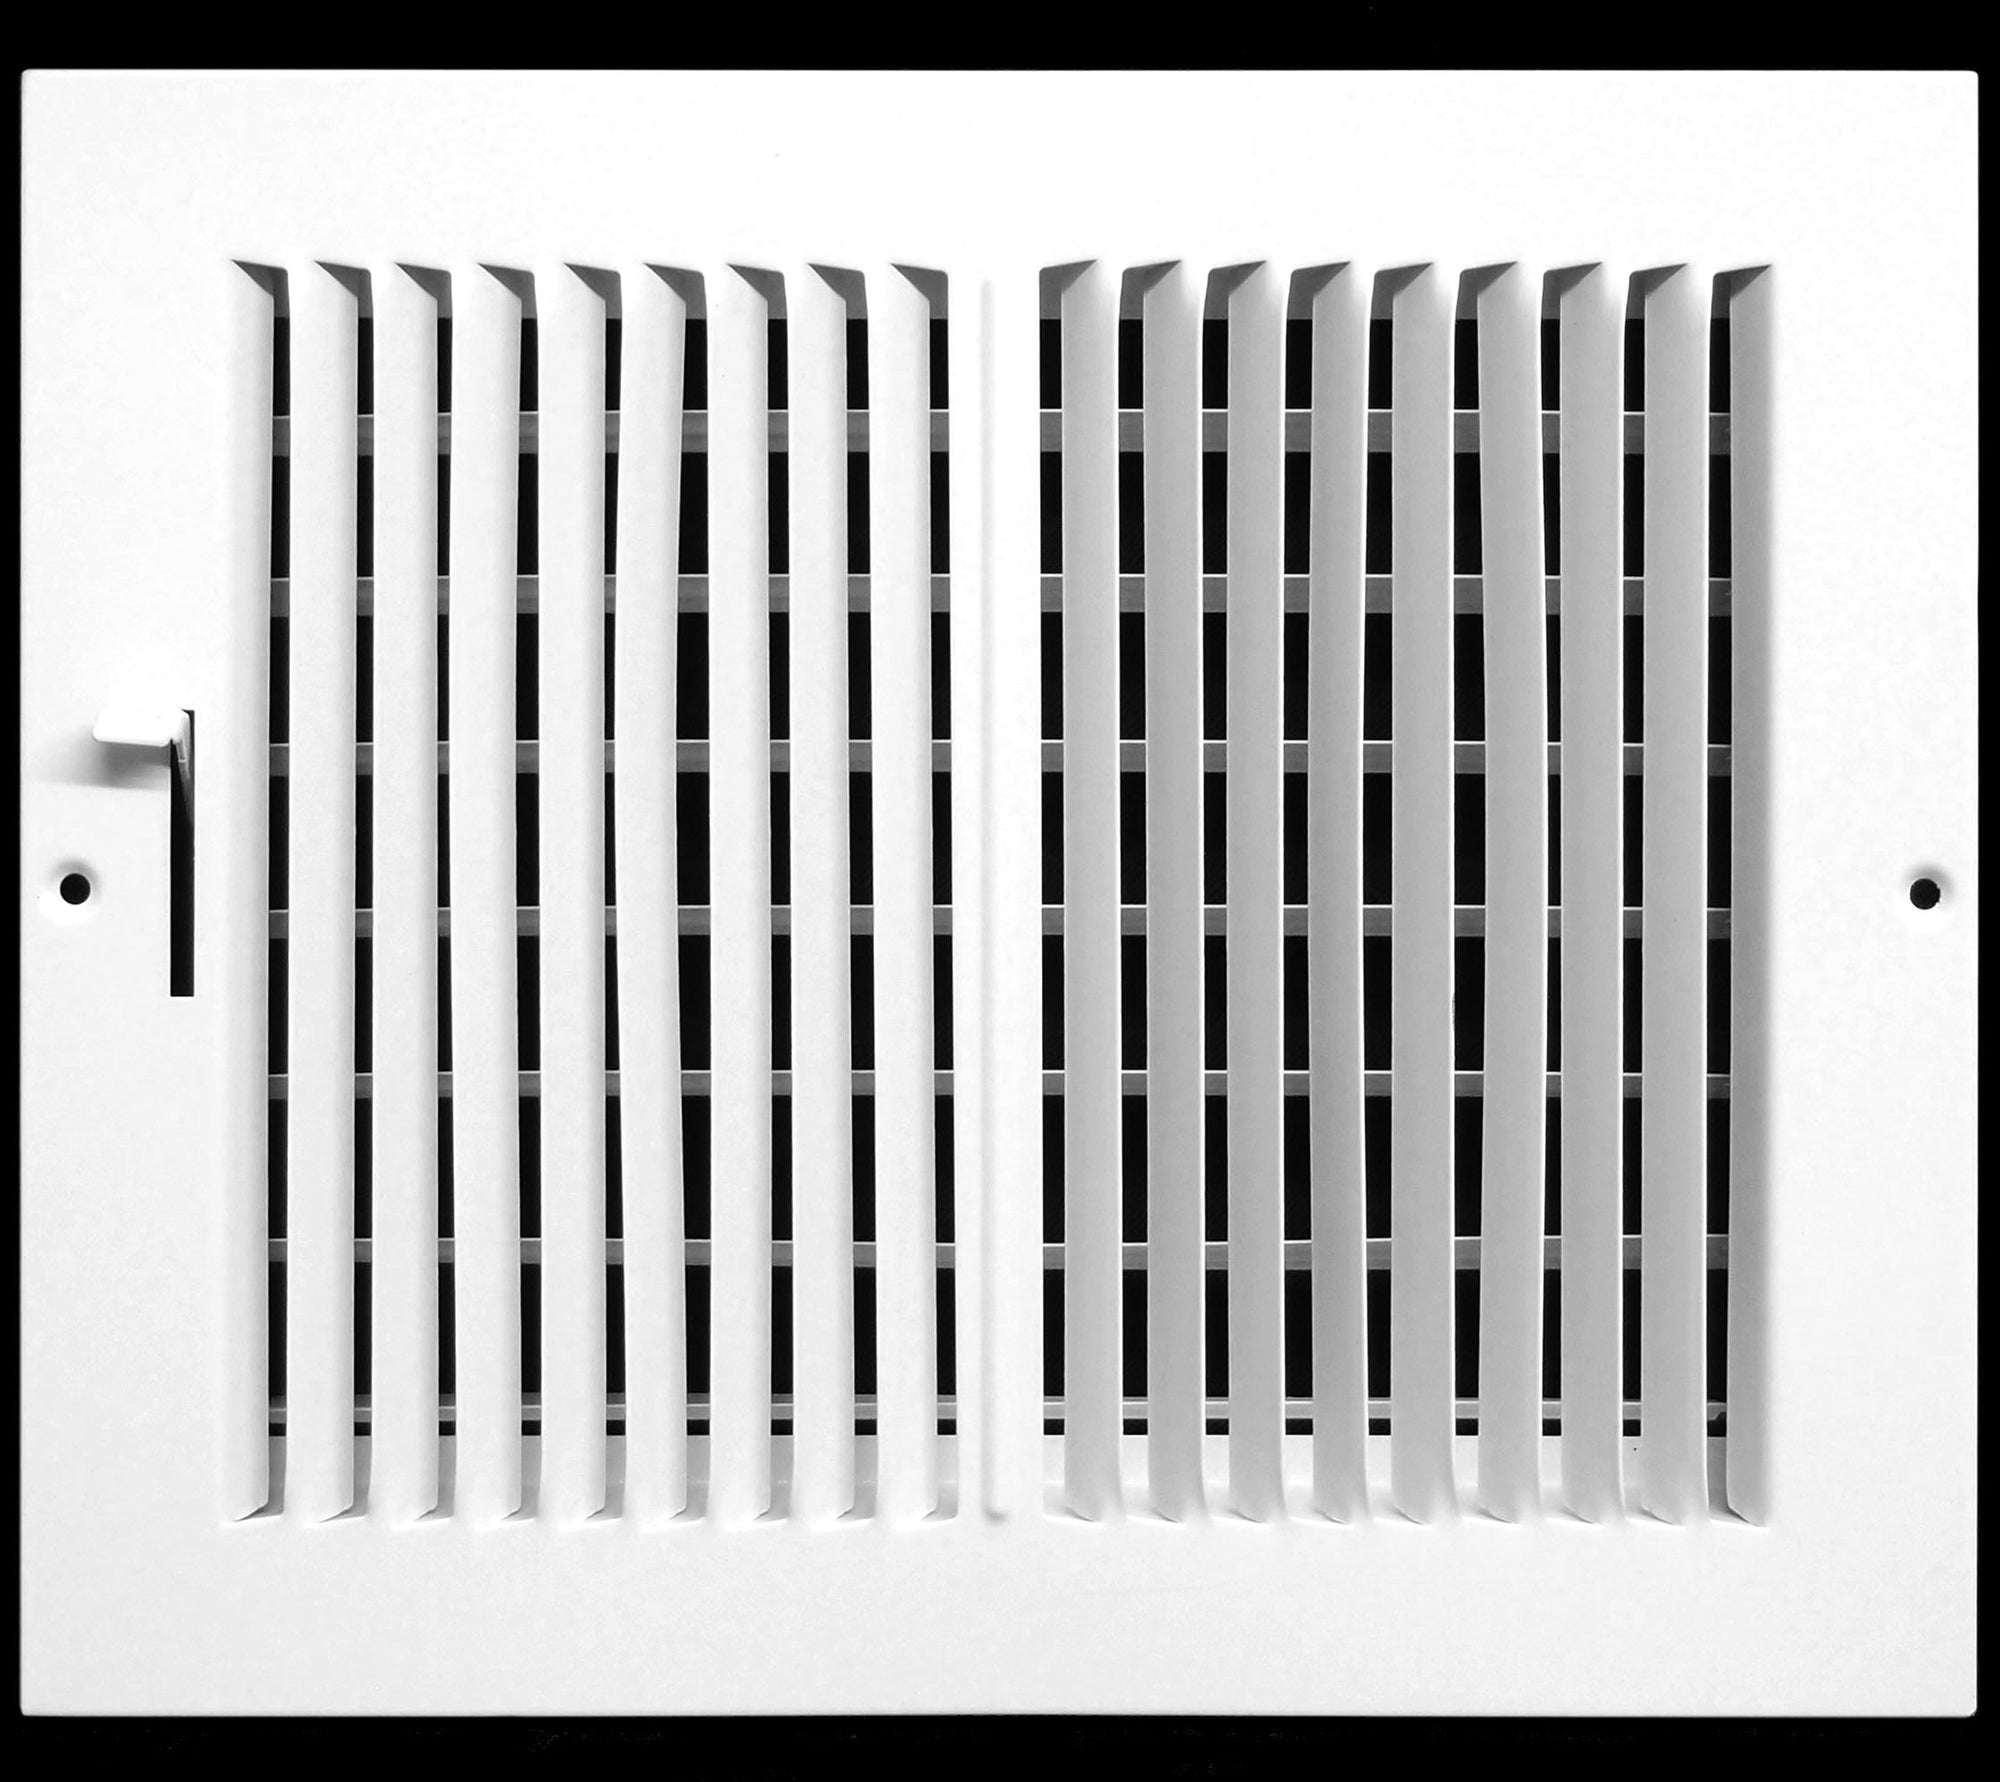 10" X 8" 2-way air supply grille - duct cover and diffuser